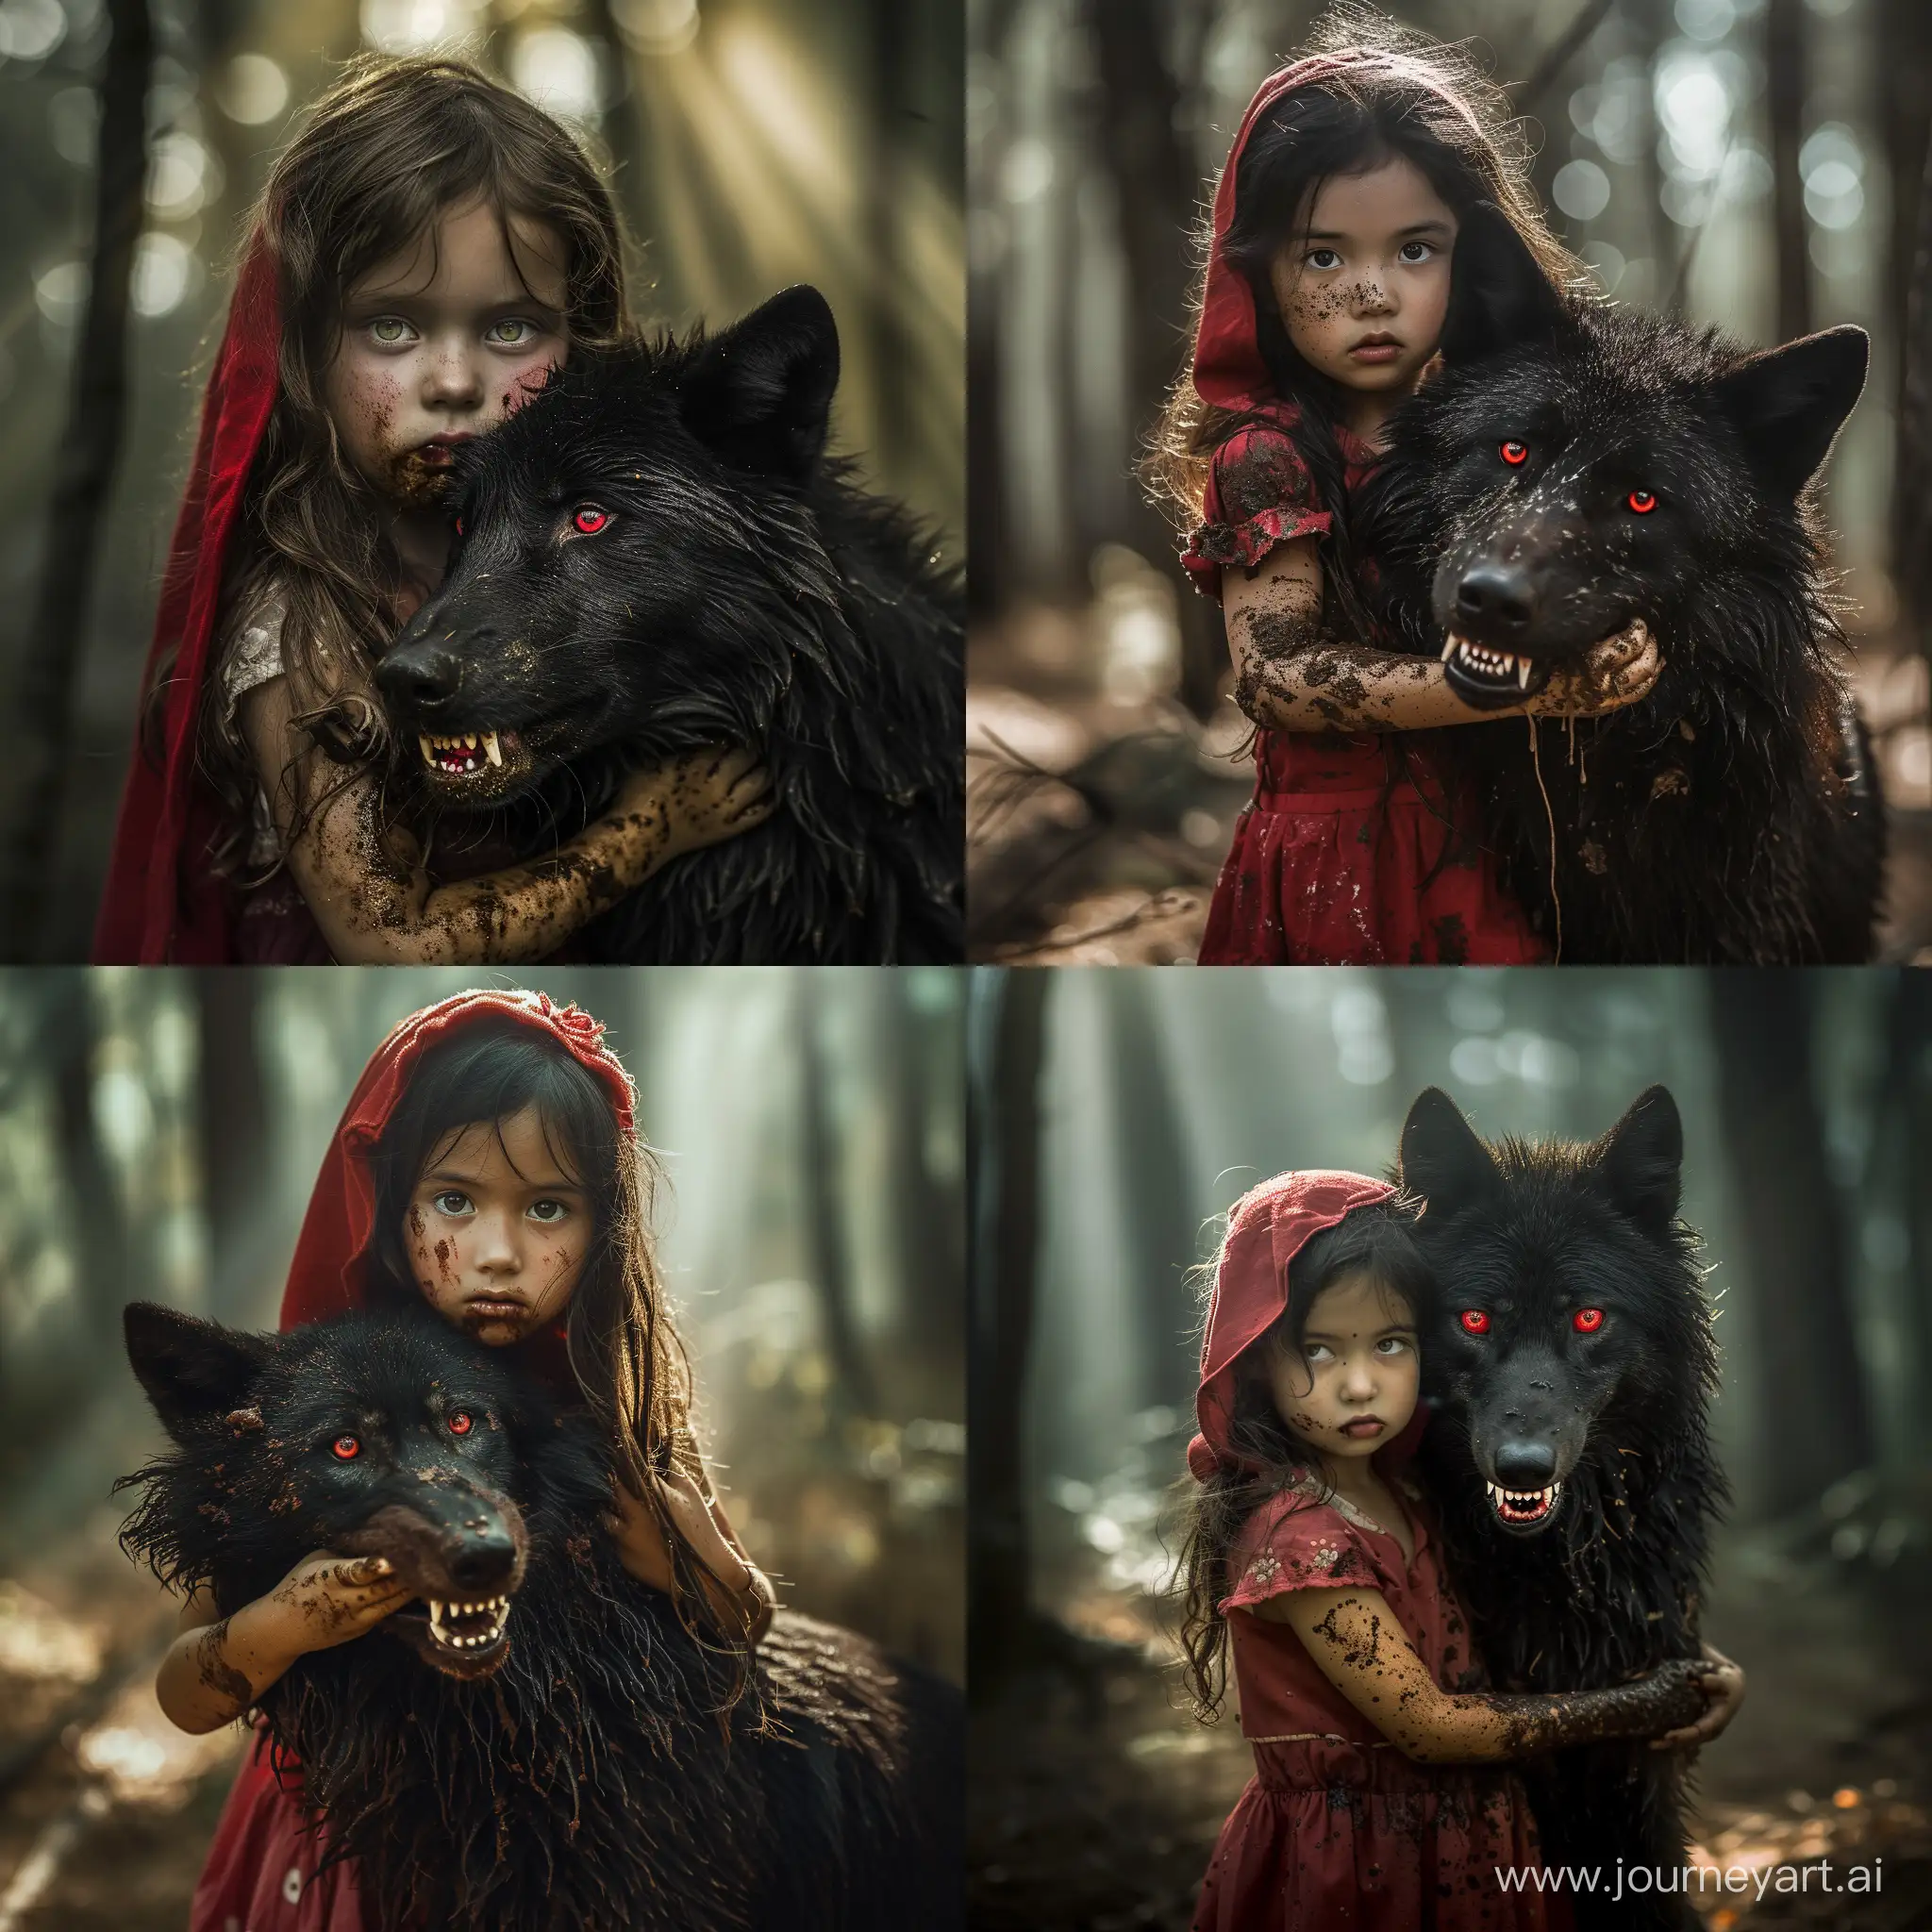 Enchanting-Encounter-Little-Red-Riding-Hood-Confronts-the-Ferocious-Black-Wolf-in-a-Mysterious-Forest